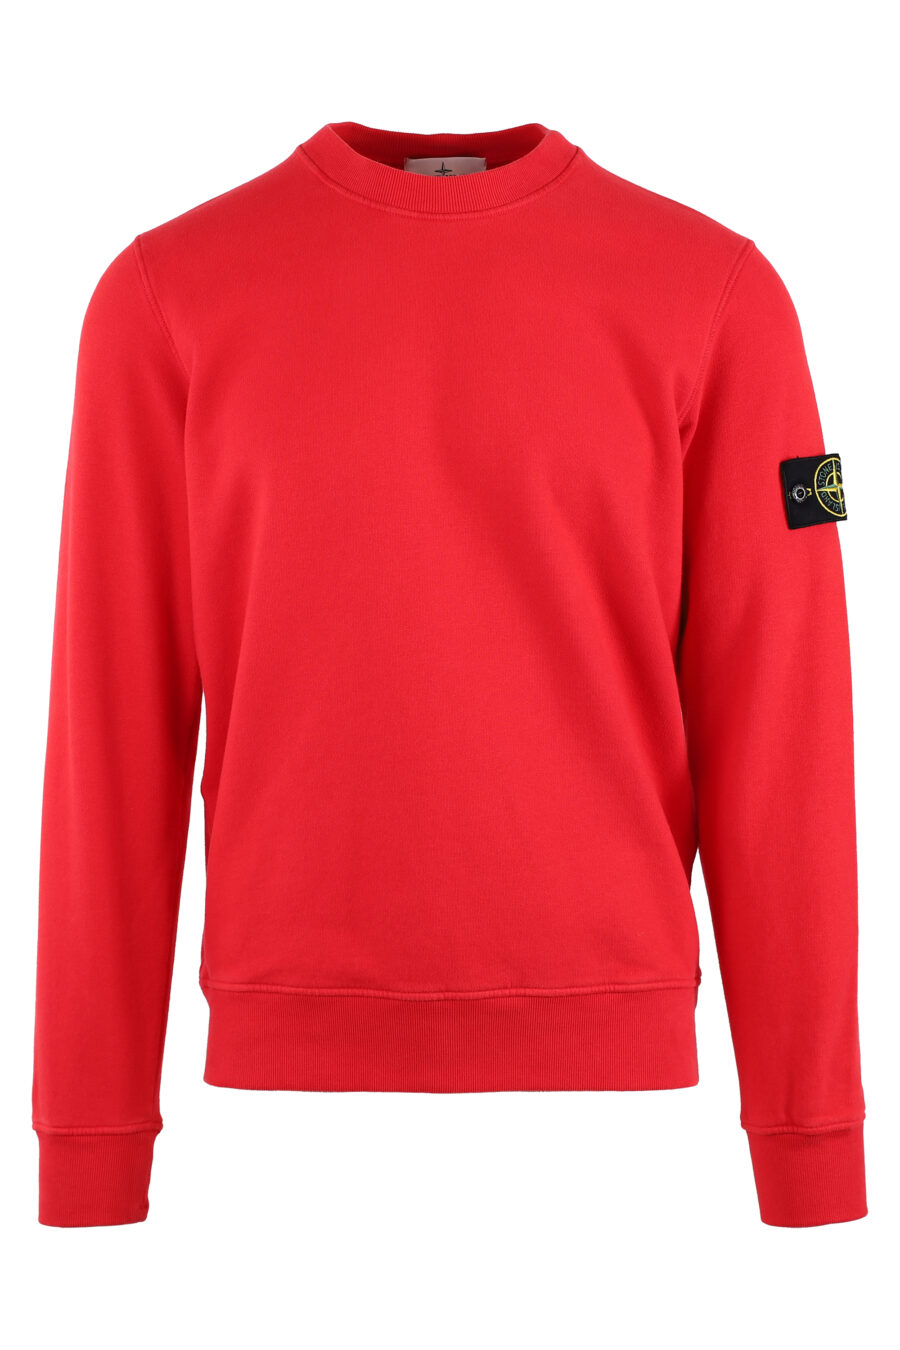 Red sweatshirt with logo patch - IMG 1461